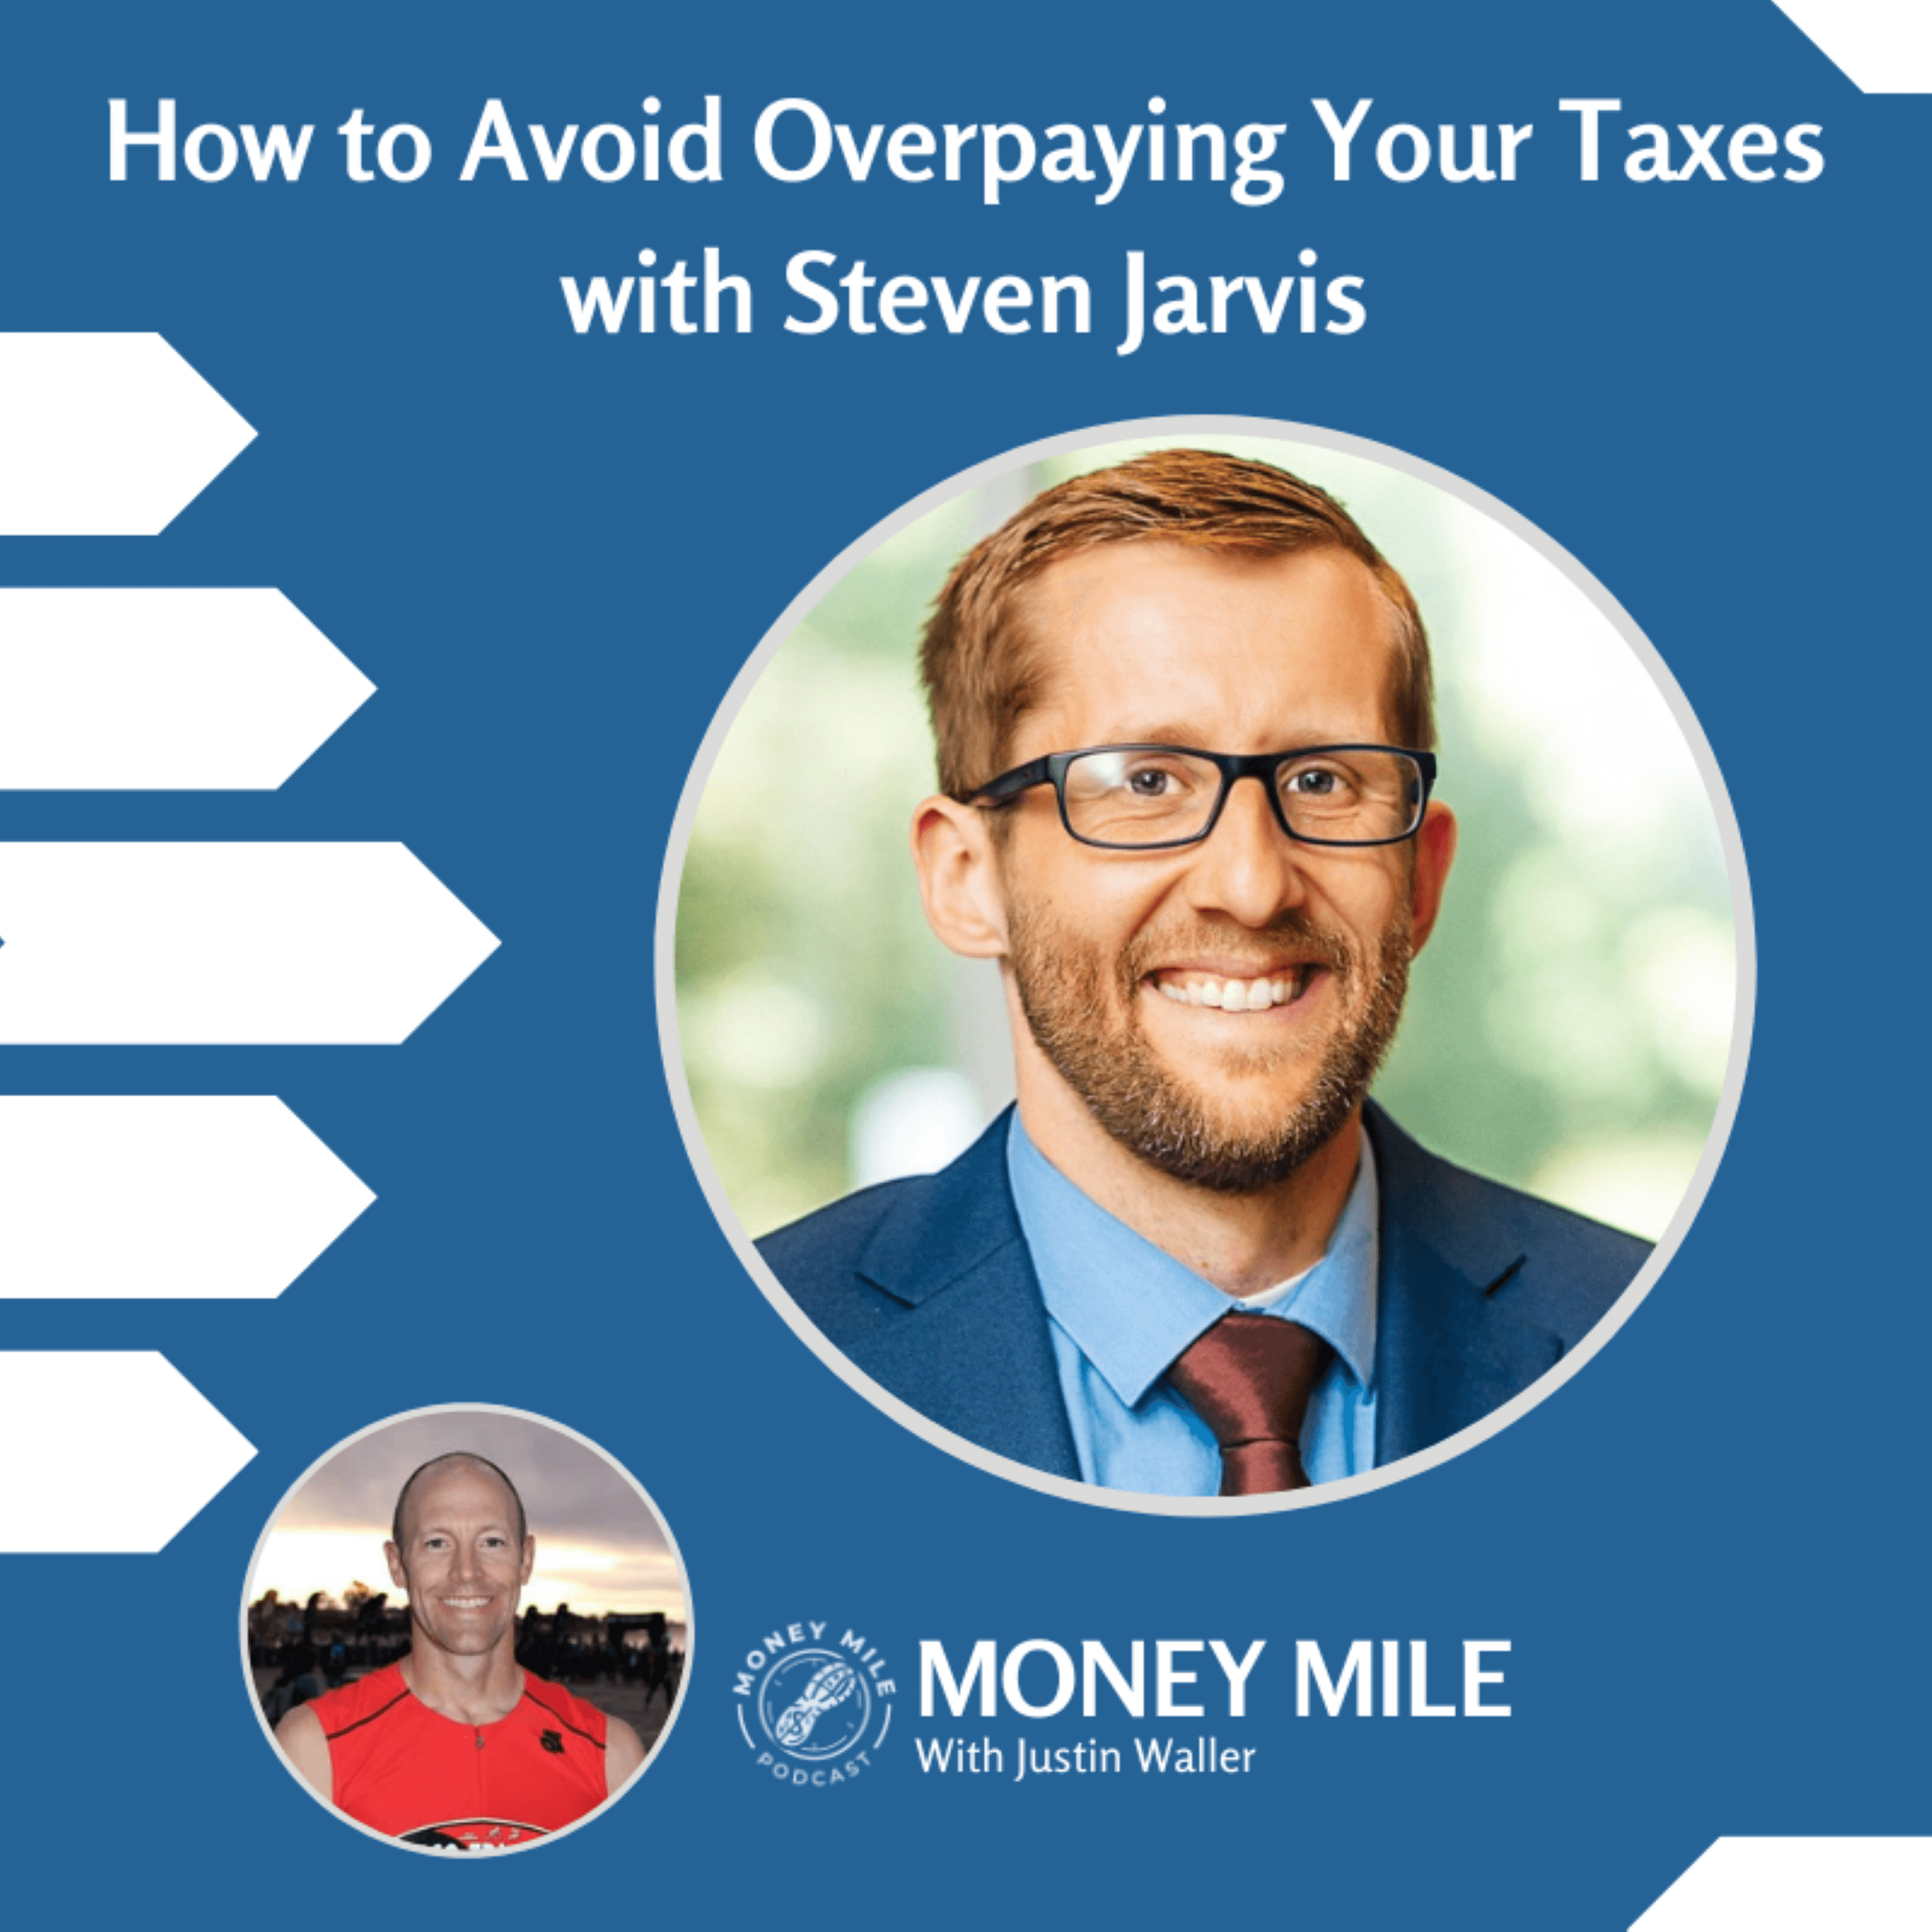 How to Avoid Overpaying Your Taxes with Steven Jarvis